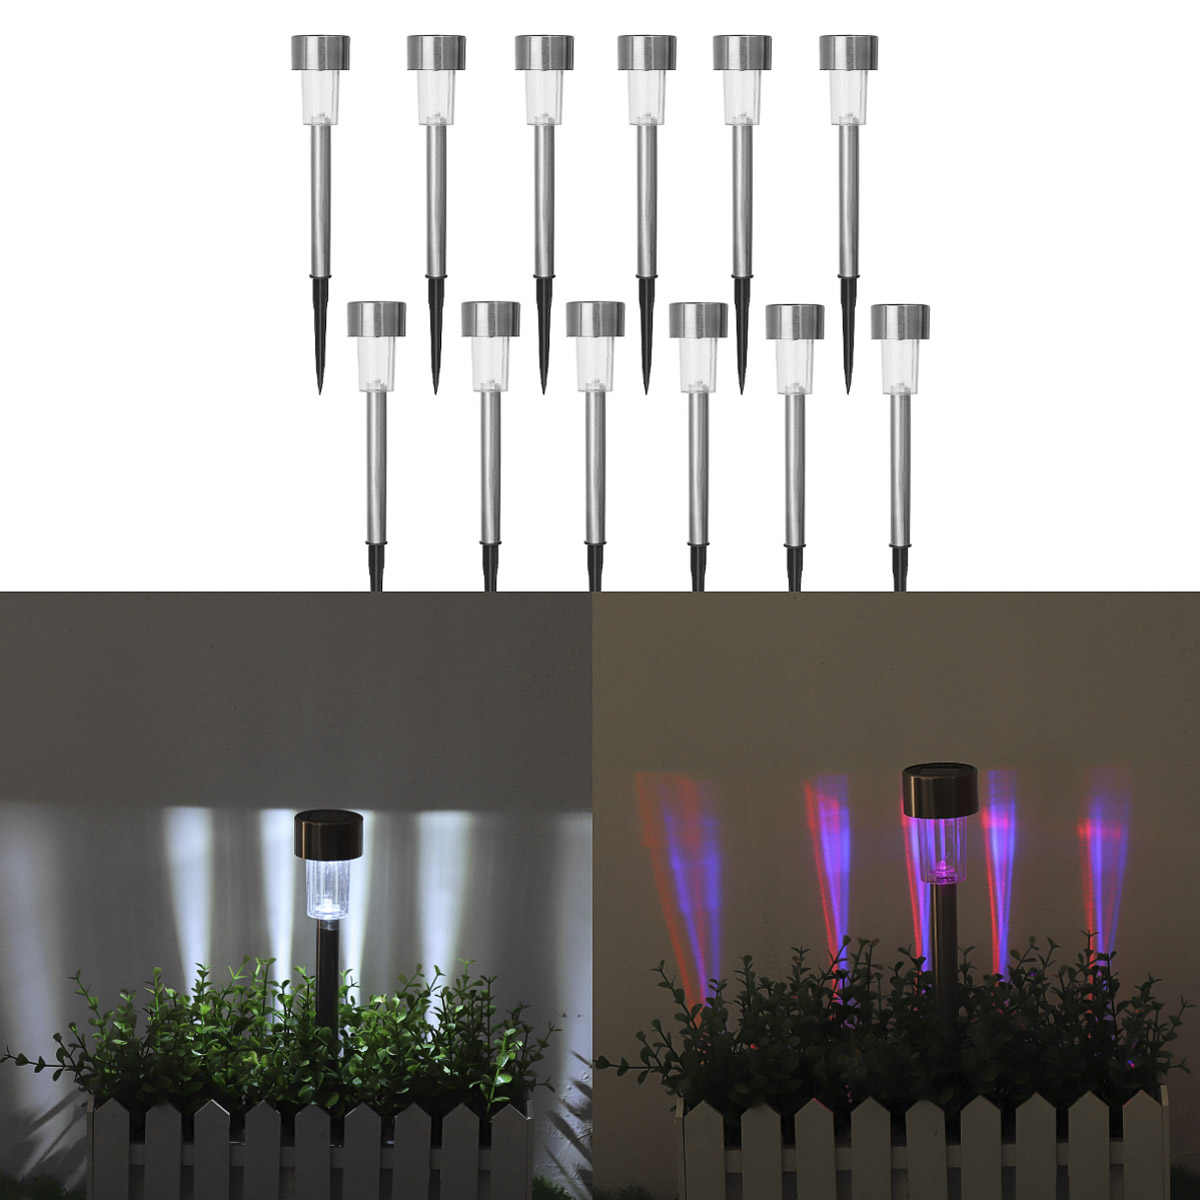 Find 12PCS Solar Lights Outdoor Pathway Garden Stainless Steel LED Lights Waterproof Landscape Lighting Lawn Patio Yard Walkway Driveway for Sale on Gipsybee.com with cryptocurrencies